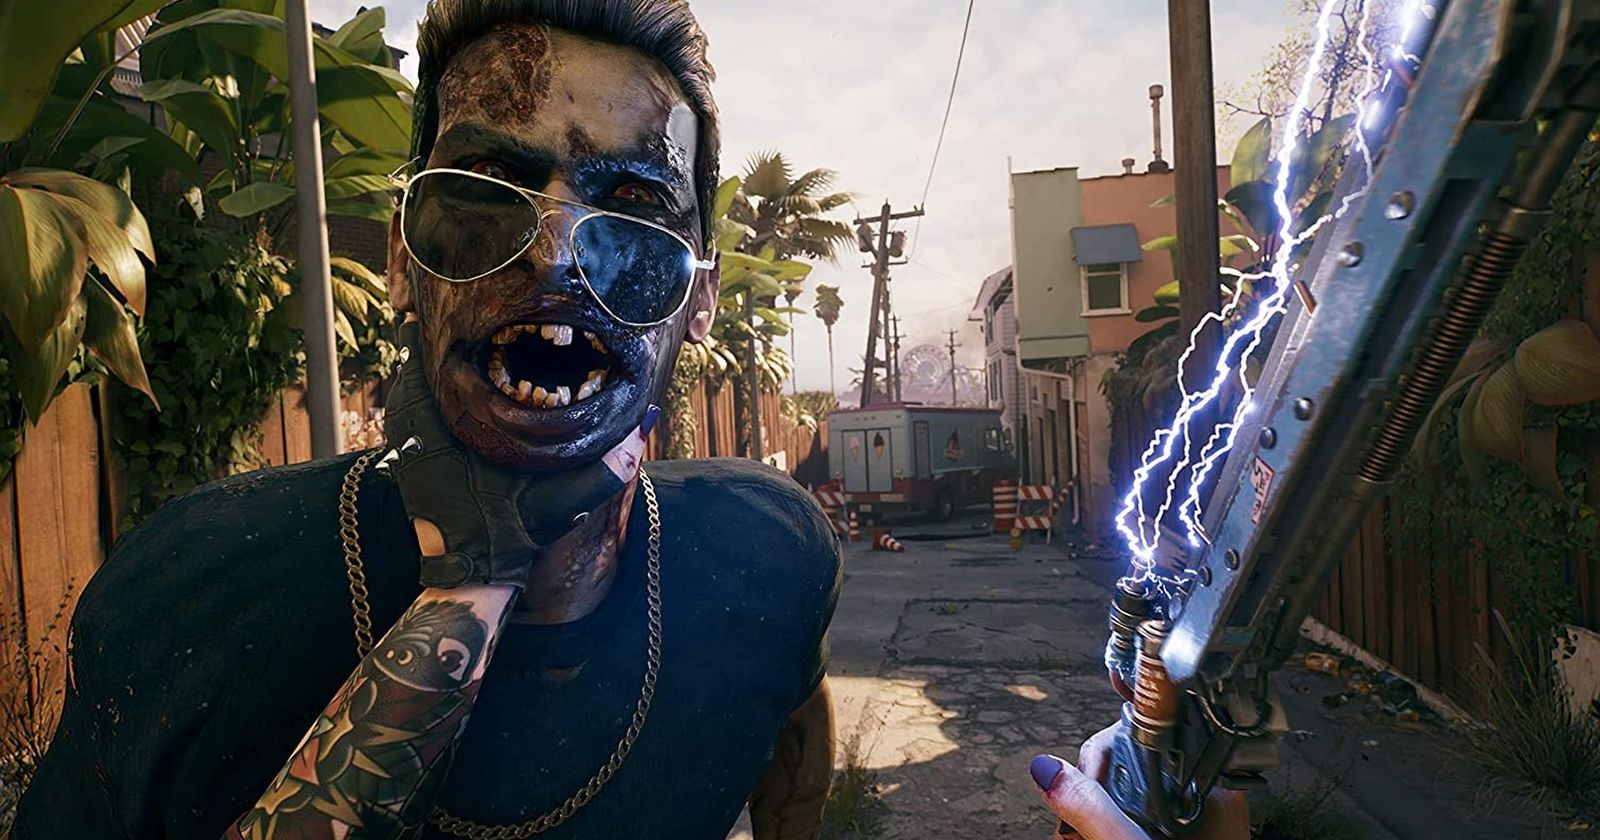 Best Slayers for Solo Players in Dead Island 2 Haus DLC - Gamepur